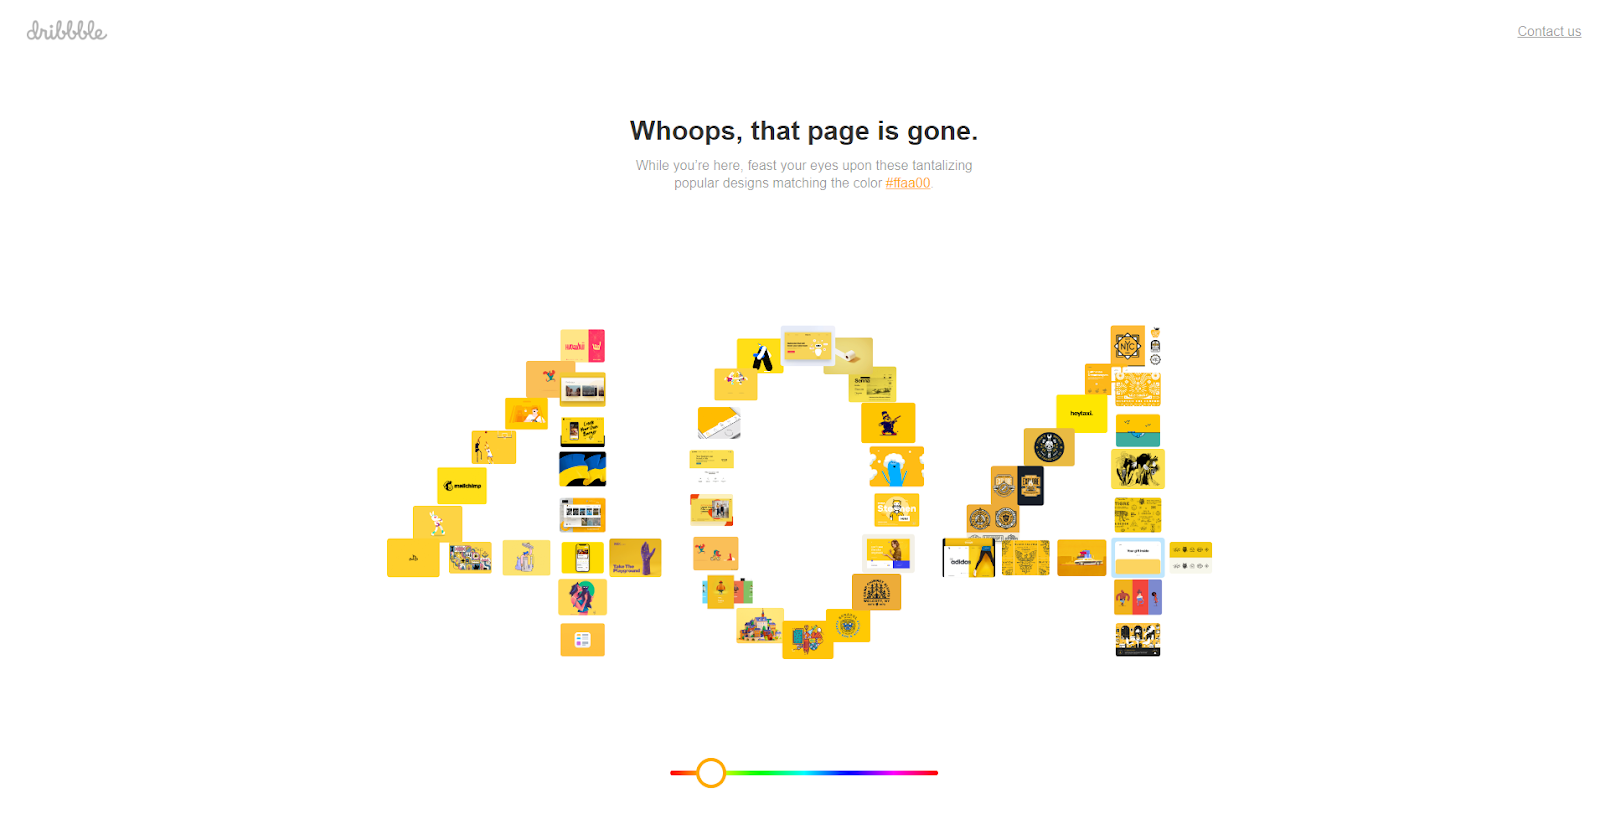 The image contains the 404 error page of Dribble with the text: Whoops, that page is gone.
While you’re here, feast your eyes upon these tantalizing popular designs matching the color #7f00ff.